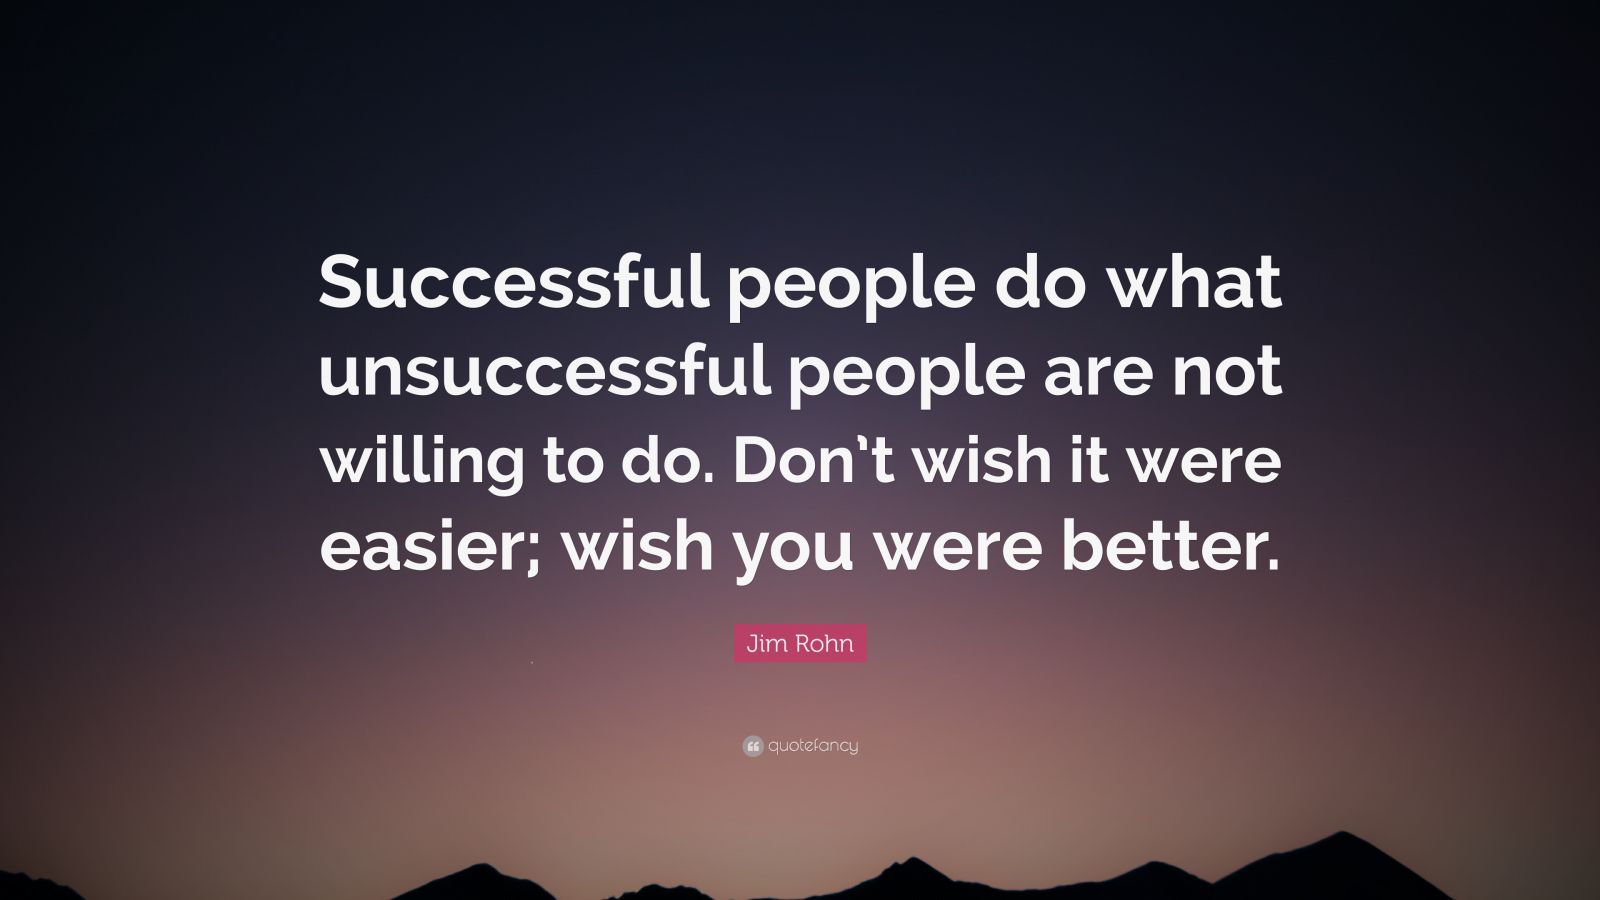 Jim Rohn Quote: “Successful people do what unsuccessful people are not ...